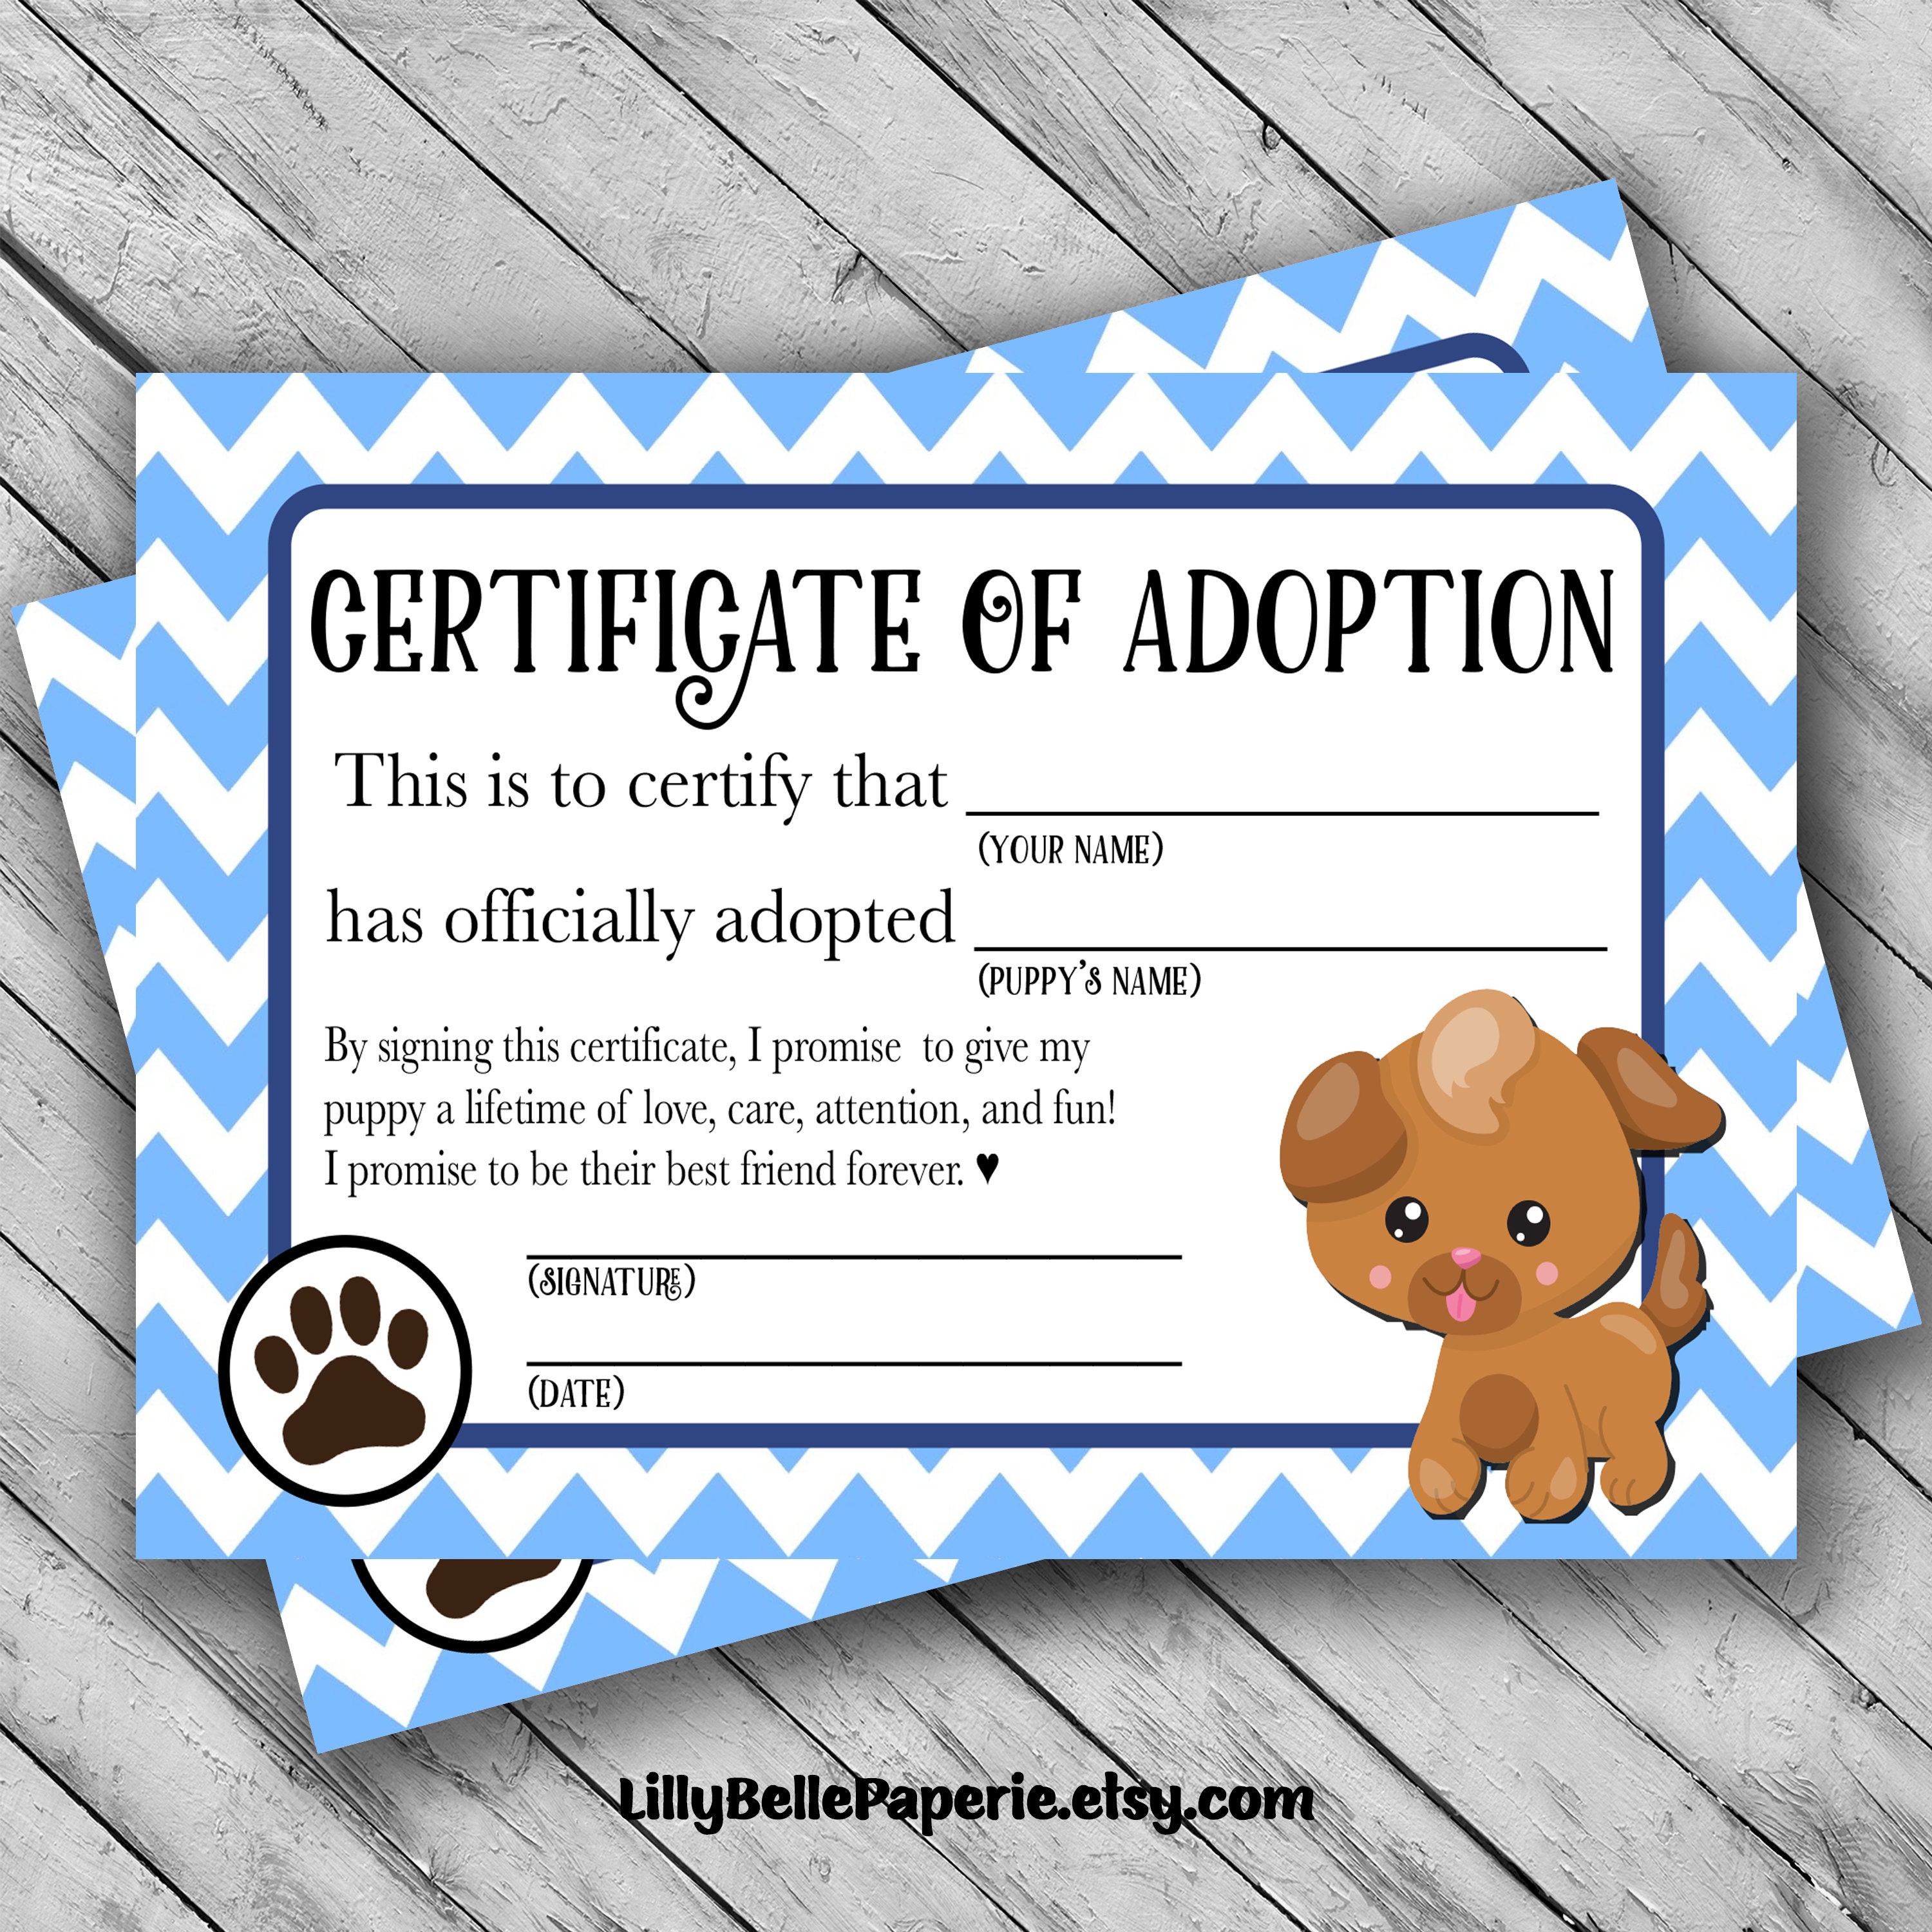 Printable Puppy Adoption Certificate - Certificate of Adoption Printout -  Pet Adoption Certificate - Boys Puppy Birthday Party Favor Tags Throughout Toy Adoption Certificate Template